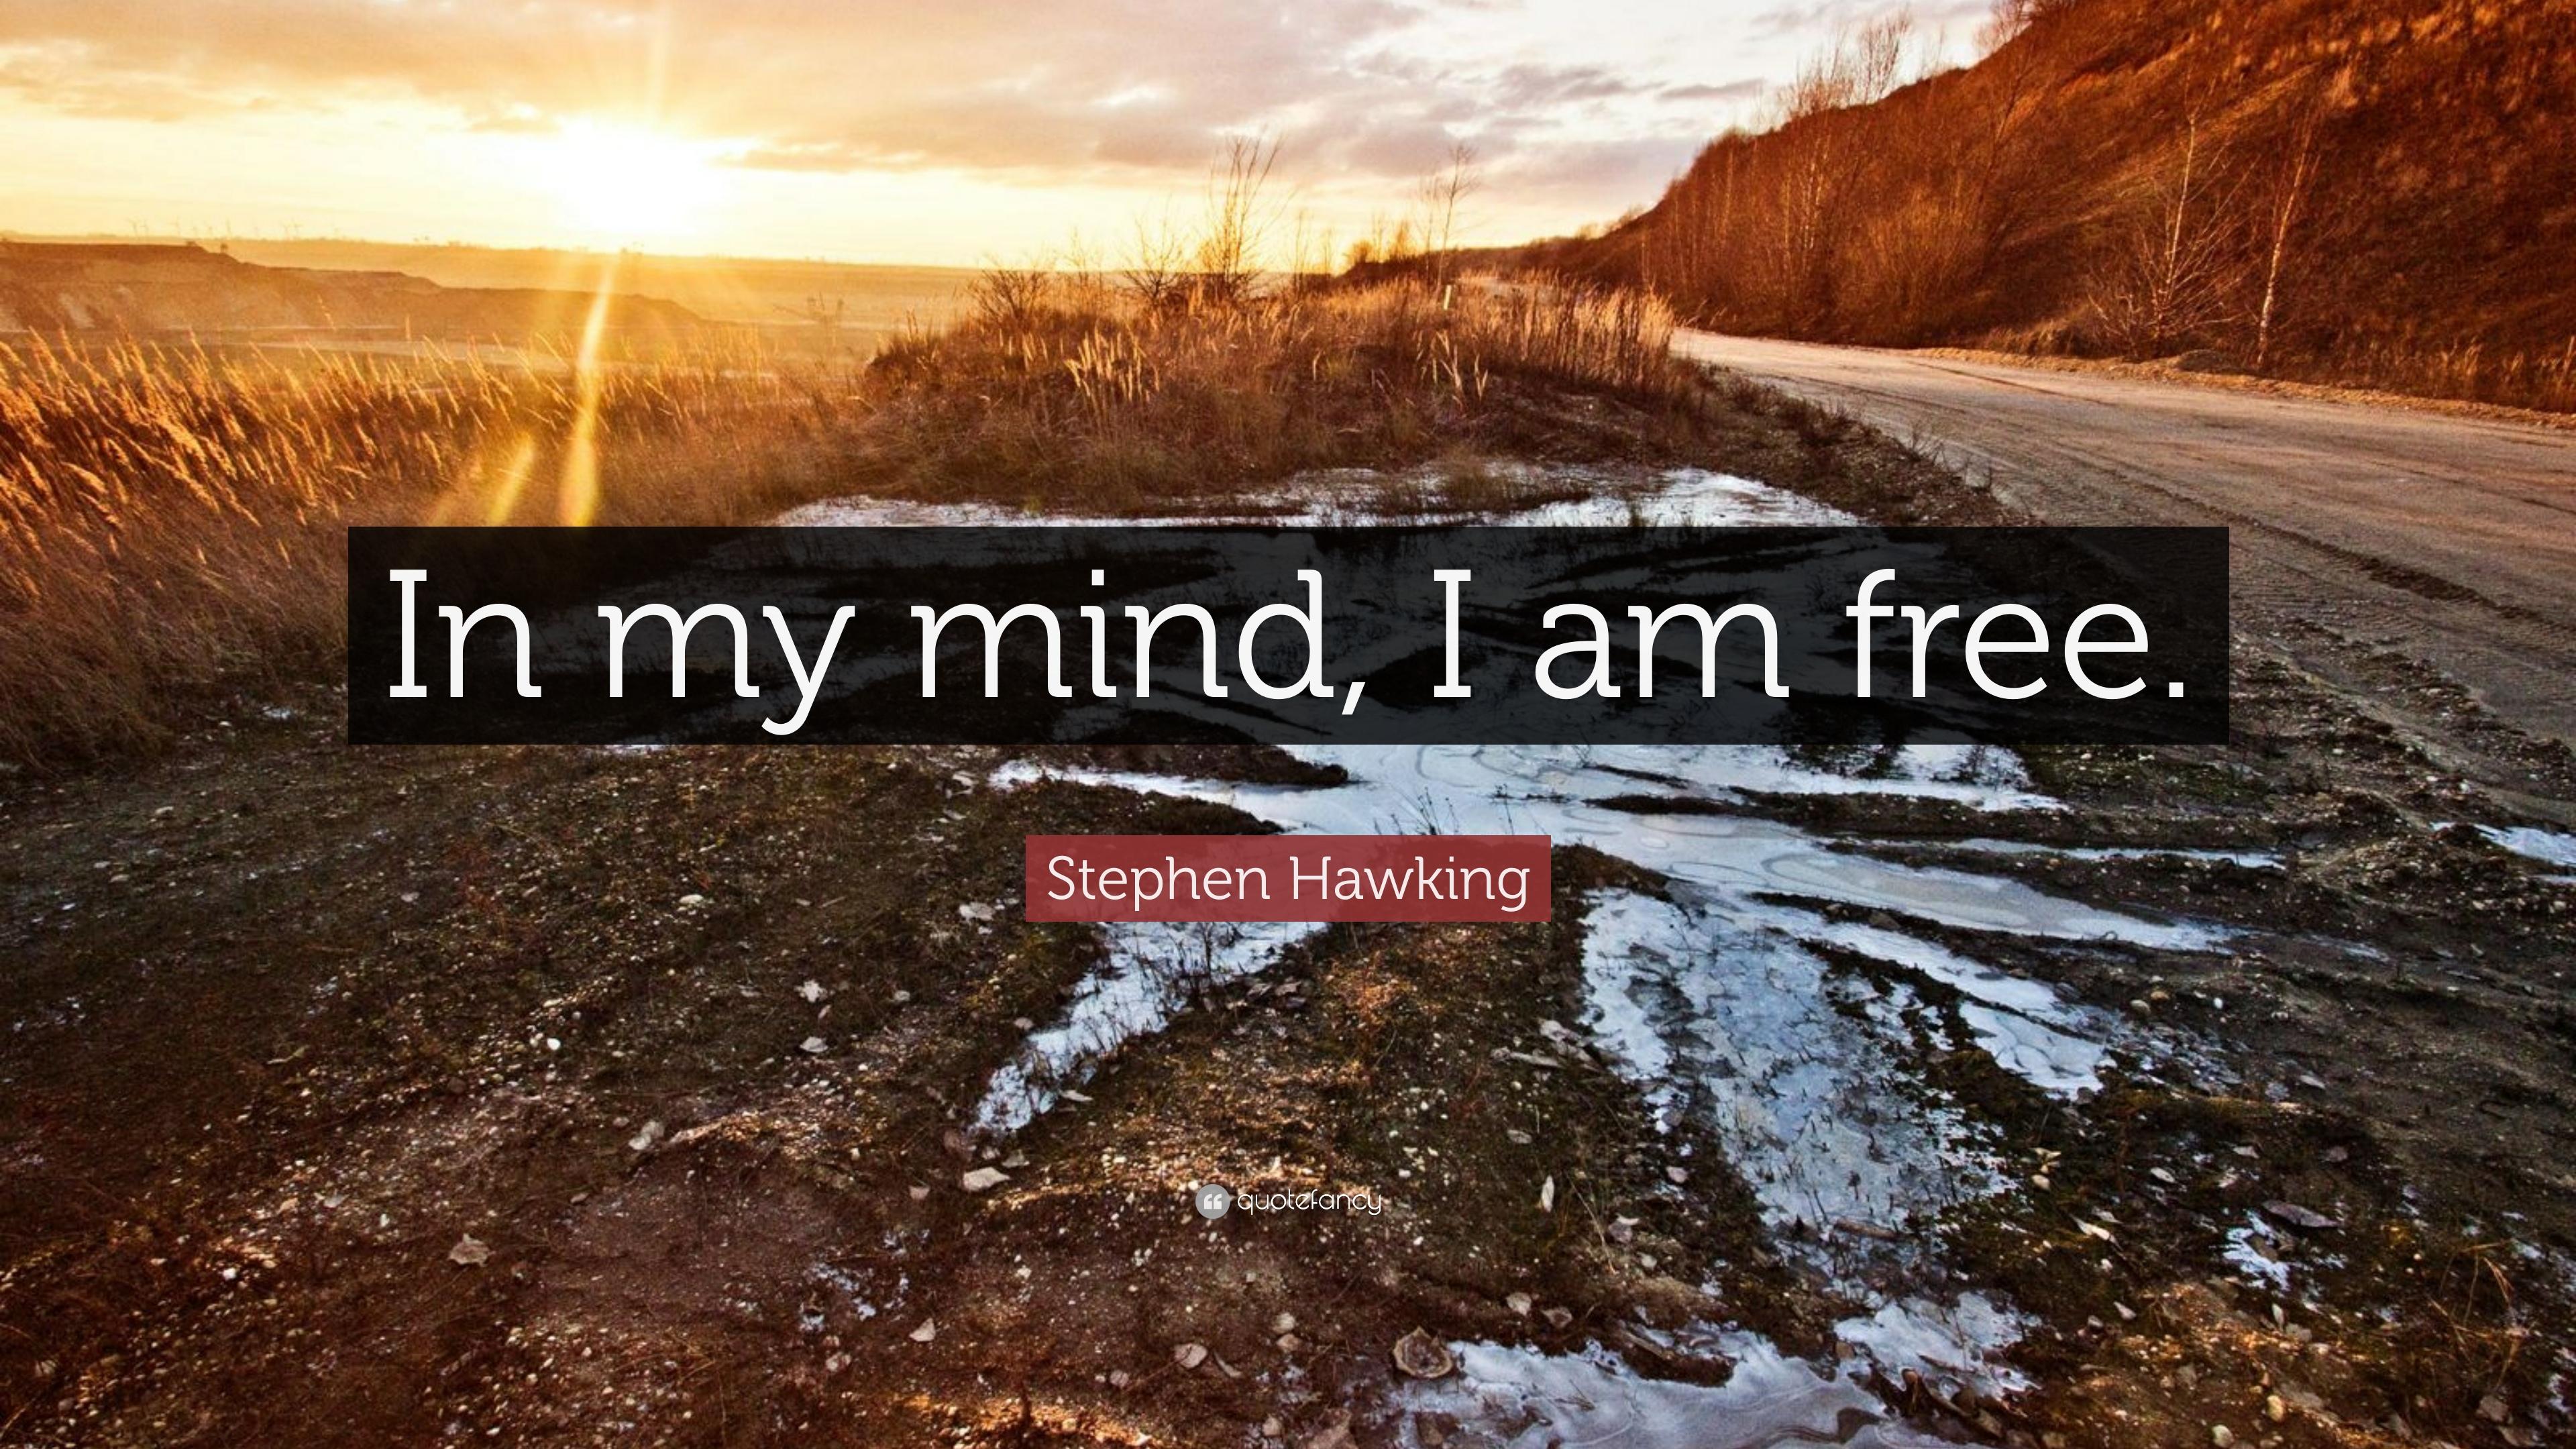 Stephen Hawking Quote: “In my mind, I am free.” 12 wallpaper